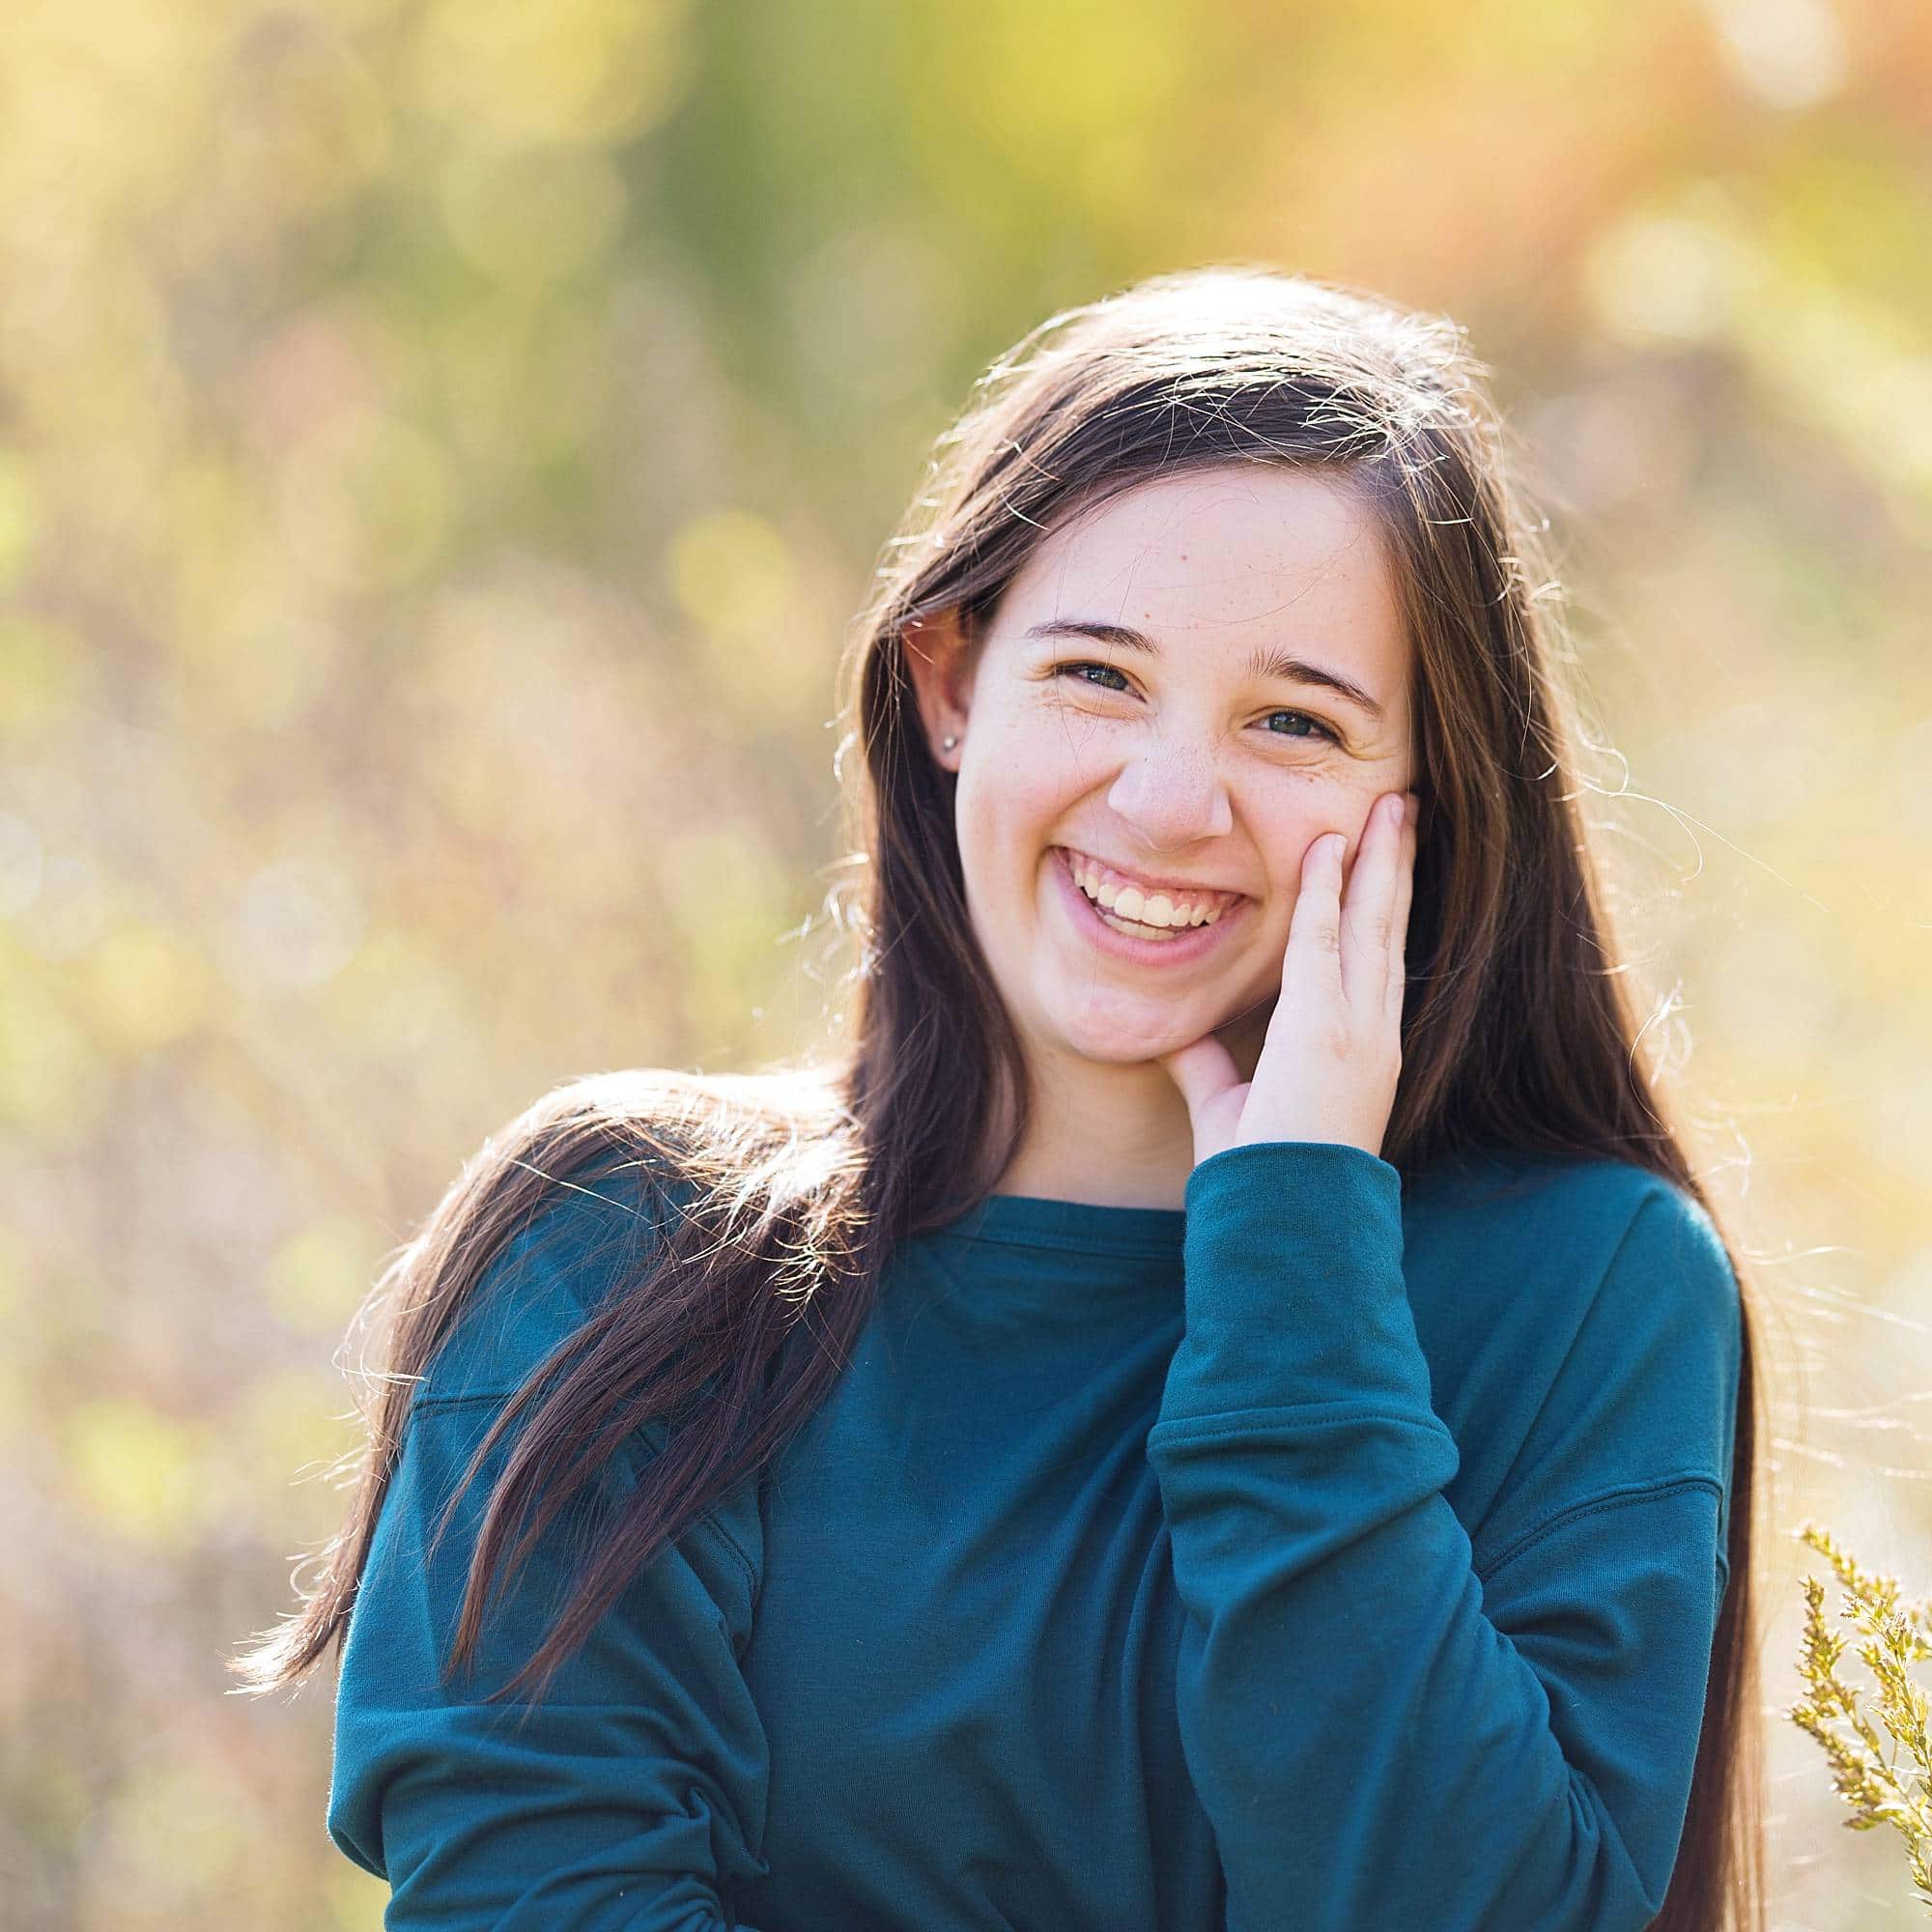 image of a teen girl with long dark hair, wearing a blue green sweater, standing in a golden field grinning with her hand up by her cheek